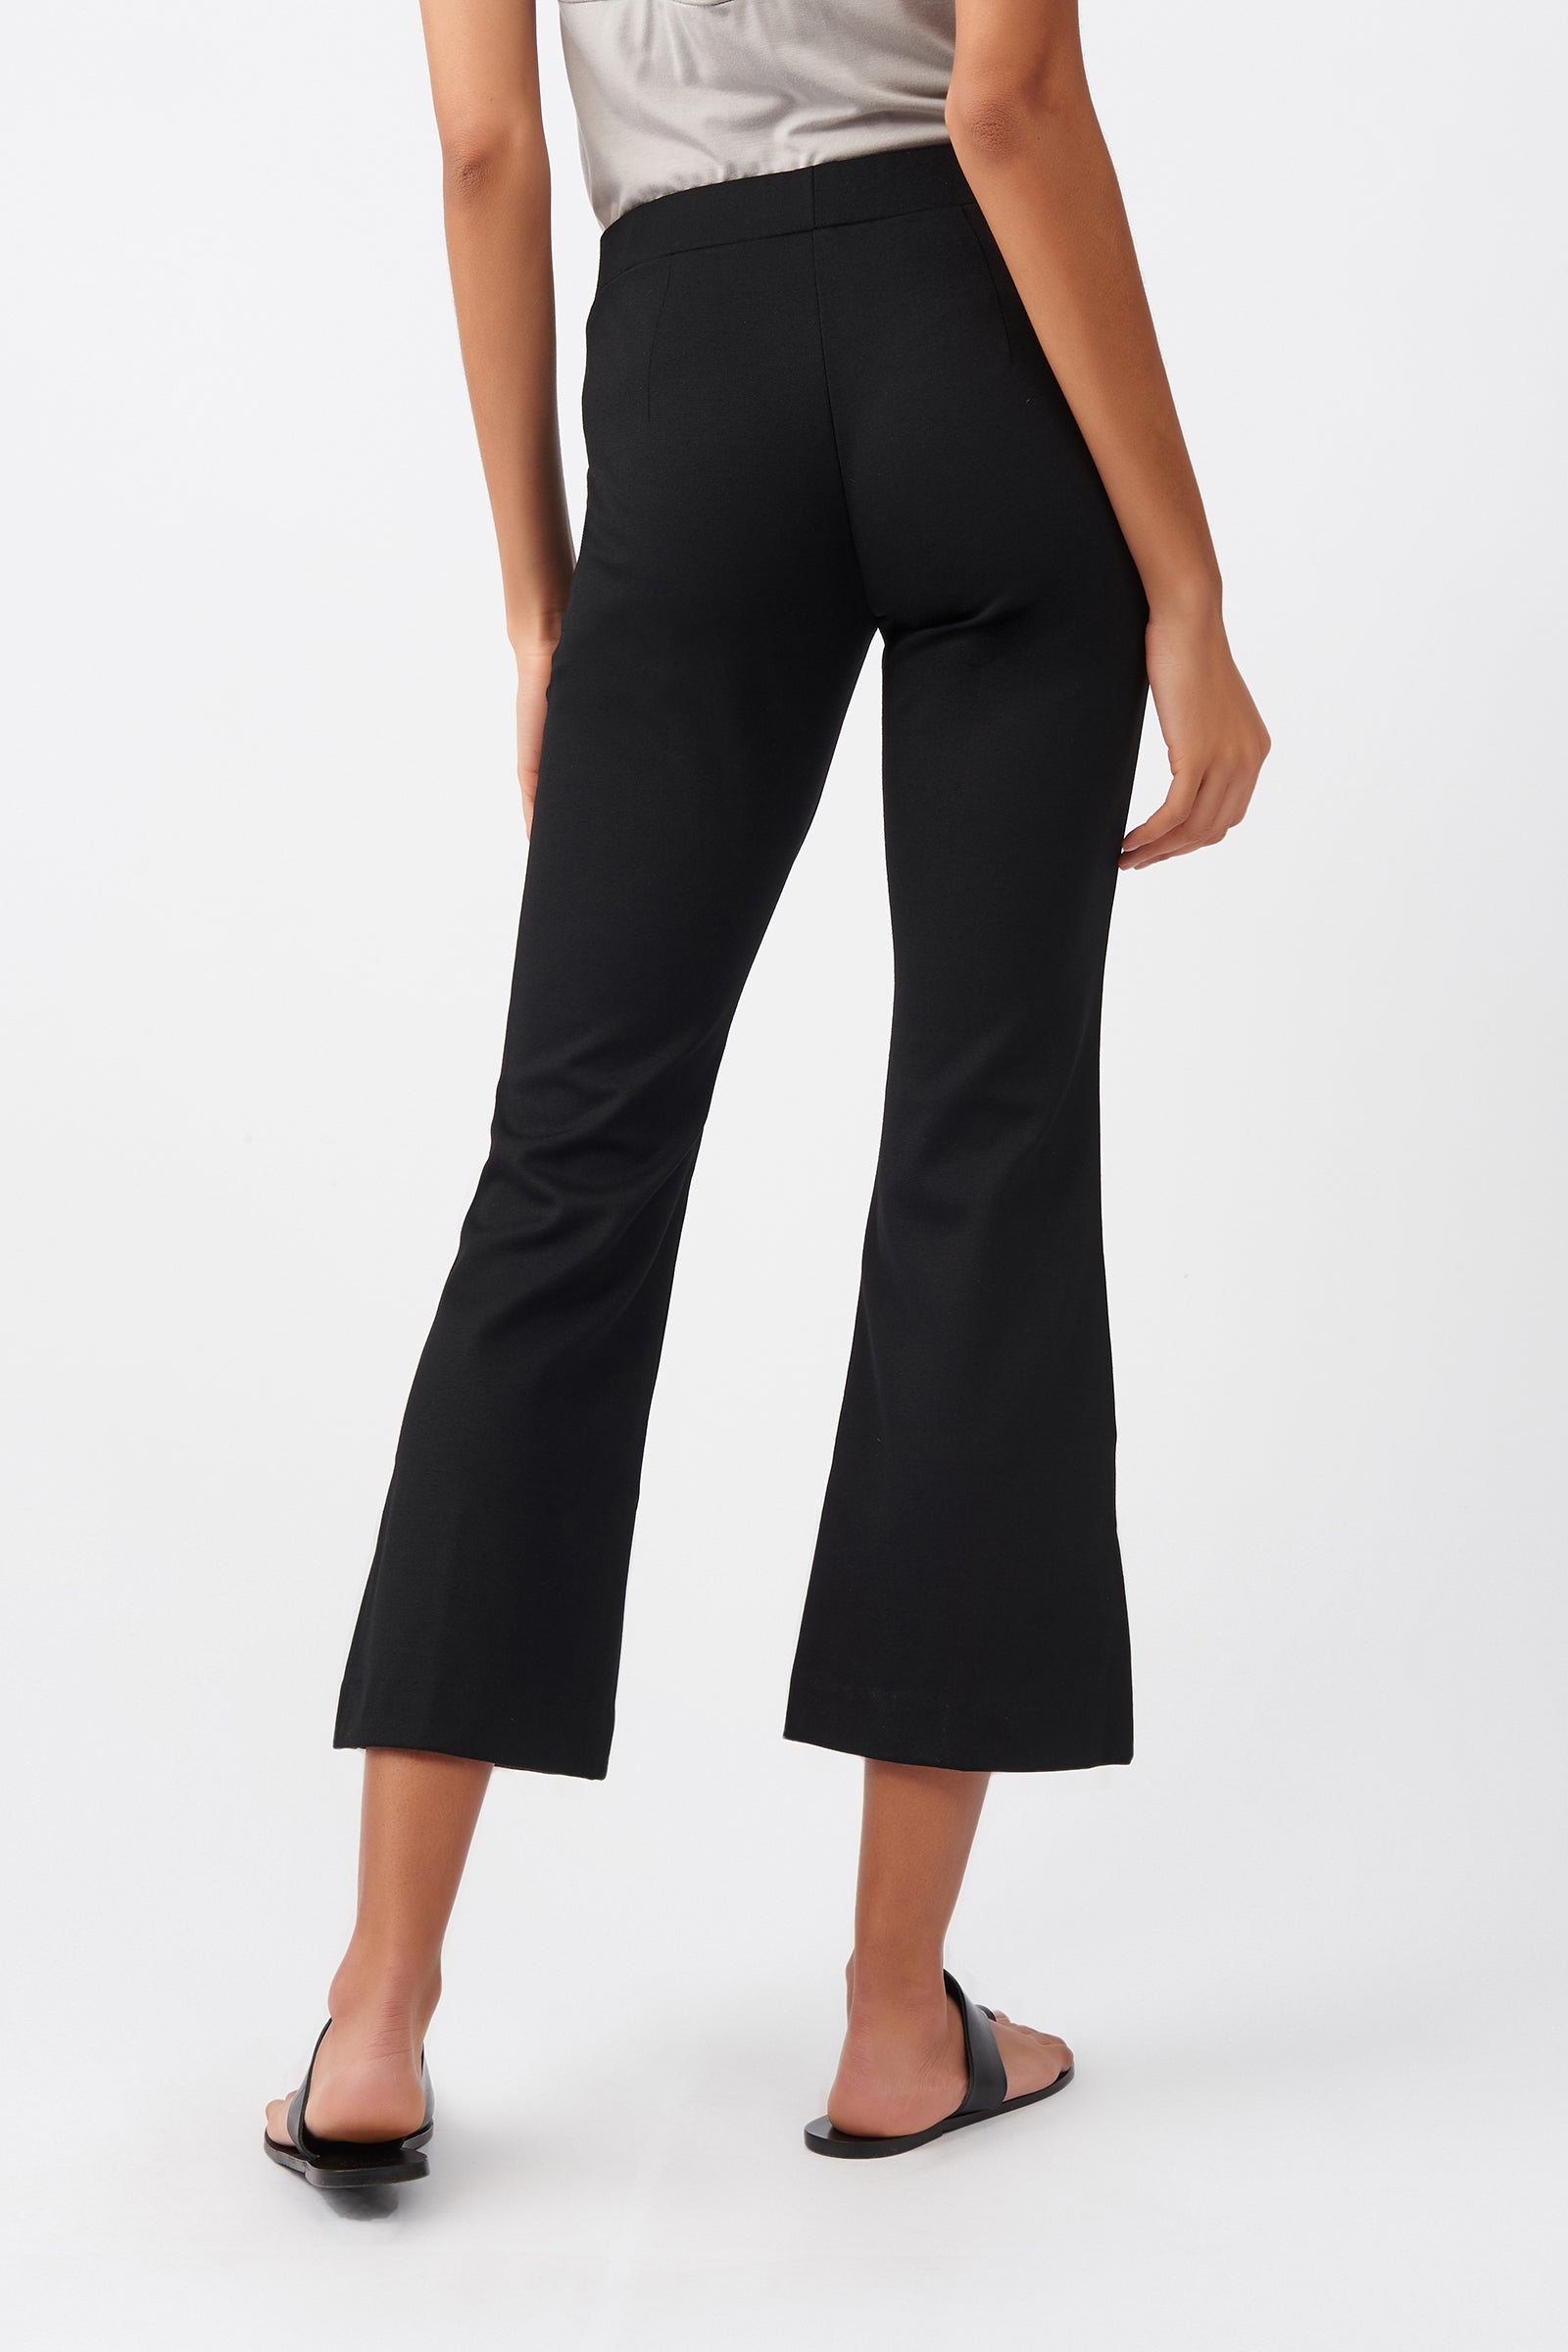 PINTUCKED KICK-FLARE TROUSERS - BLACK - COS